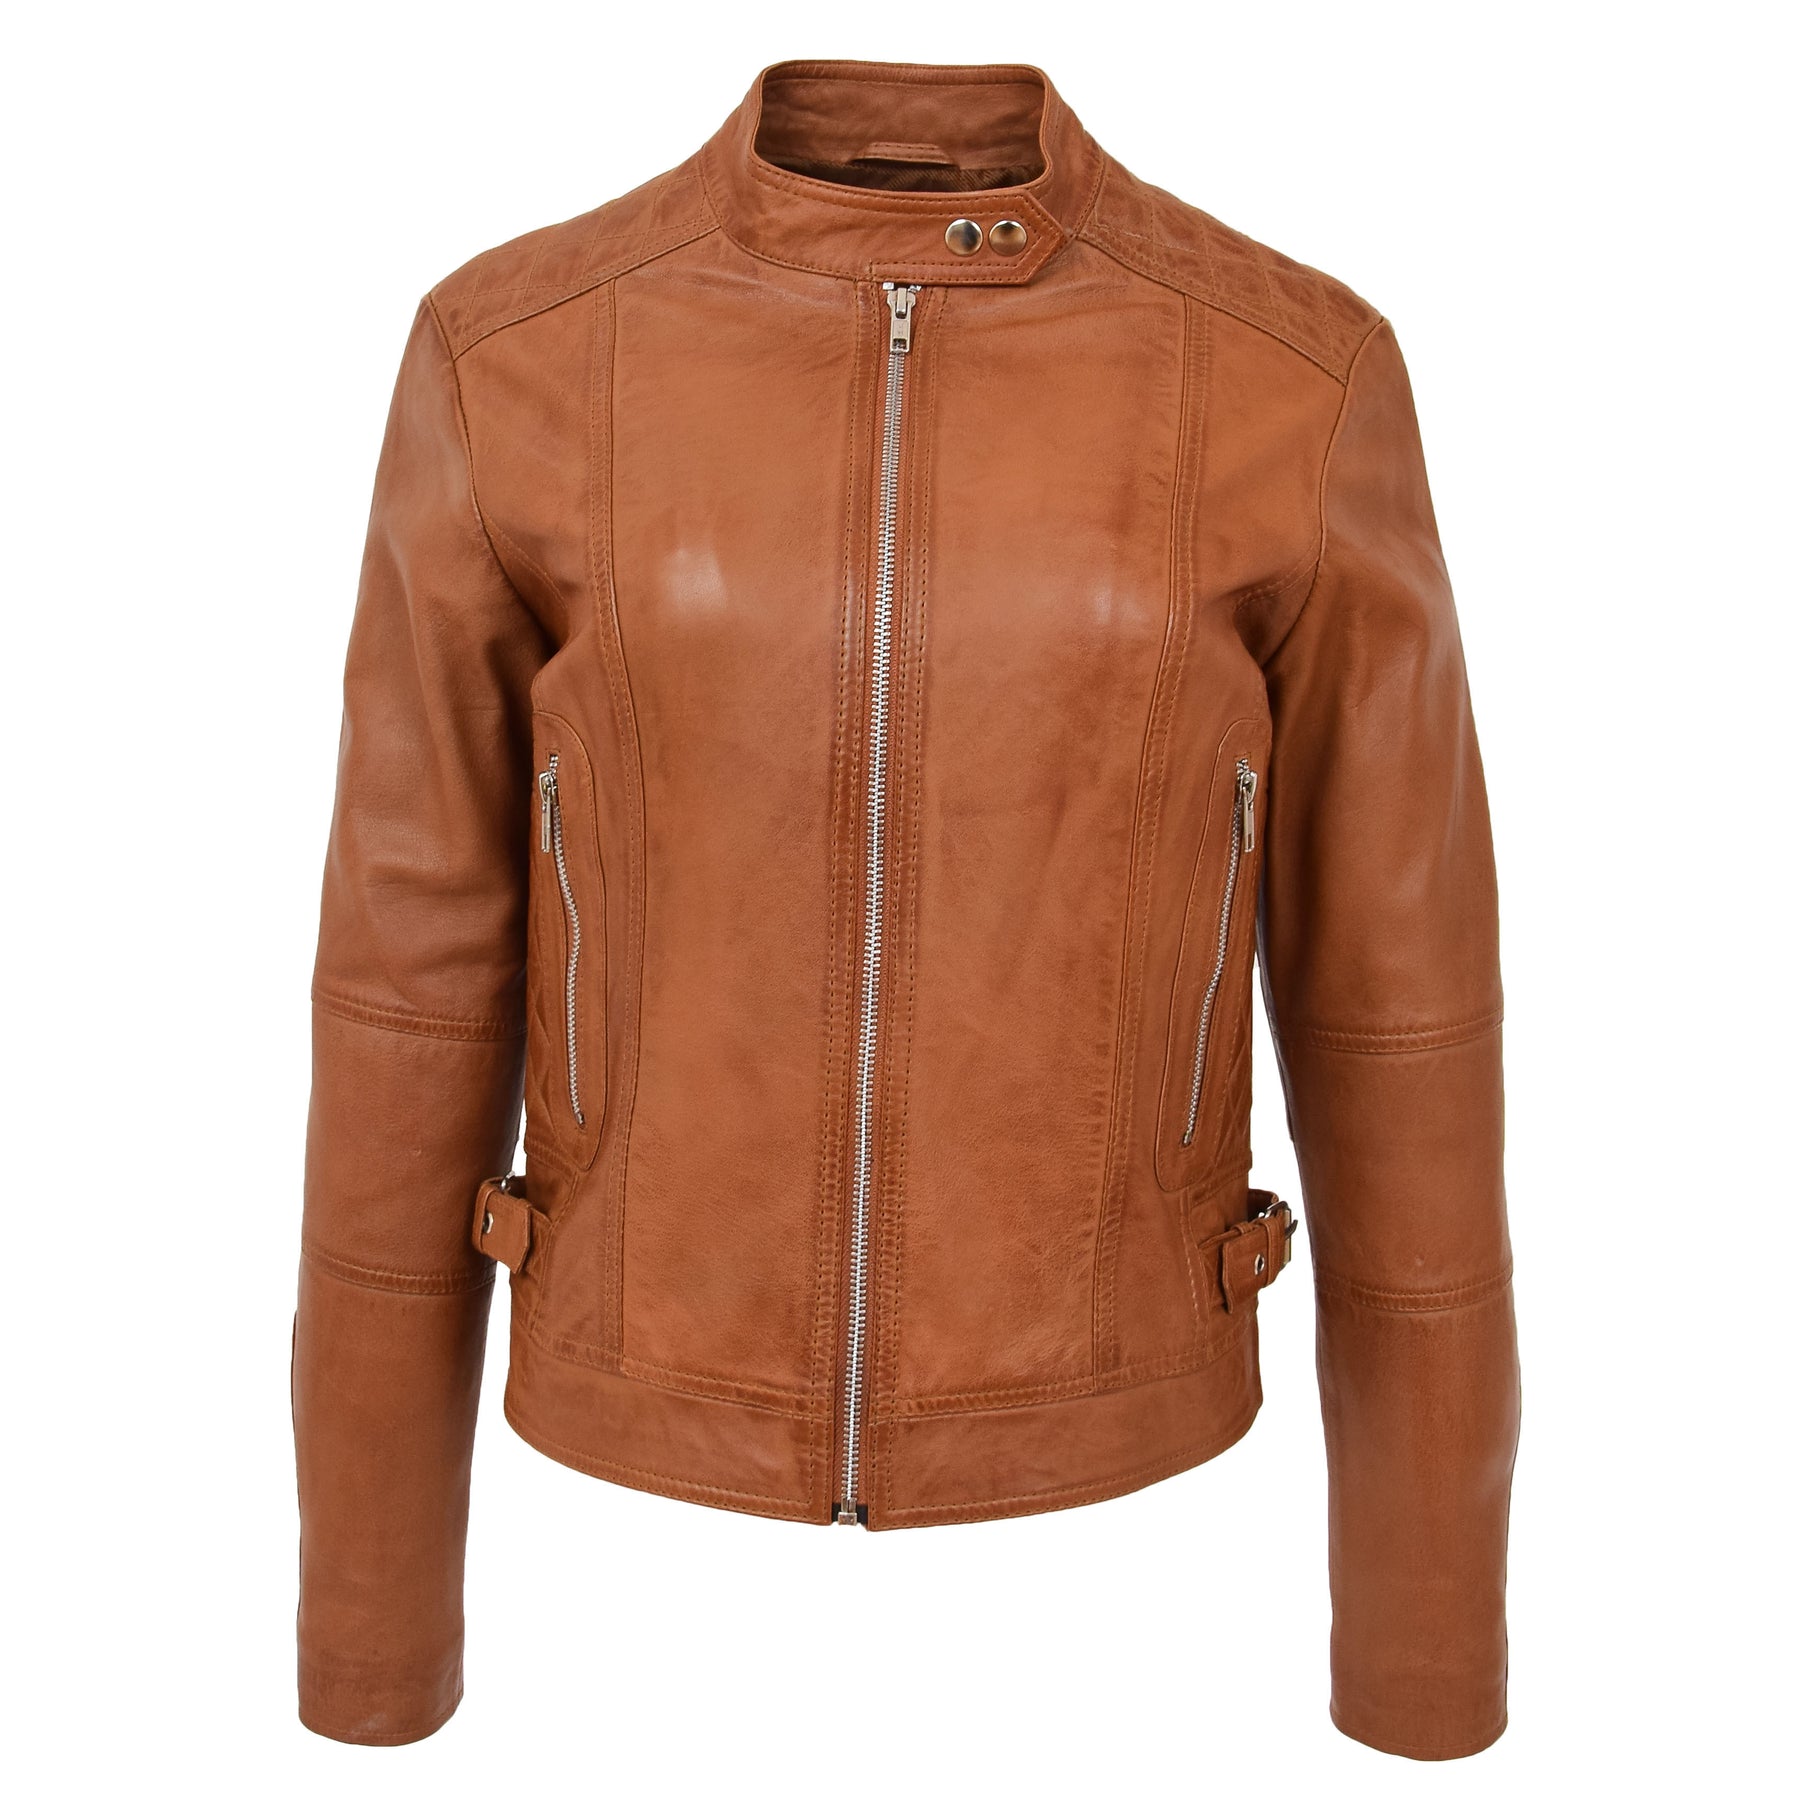 WOMENS SOFT TAN LEATHER BIKER JACKET DESIGNER STYLISH FITTED QUILTED CELESTE